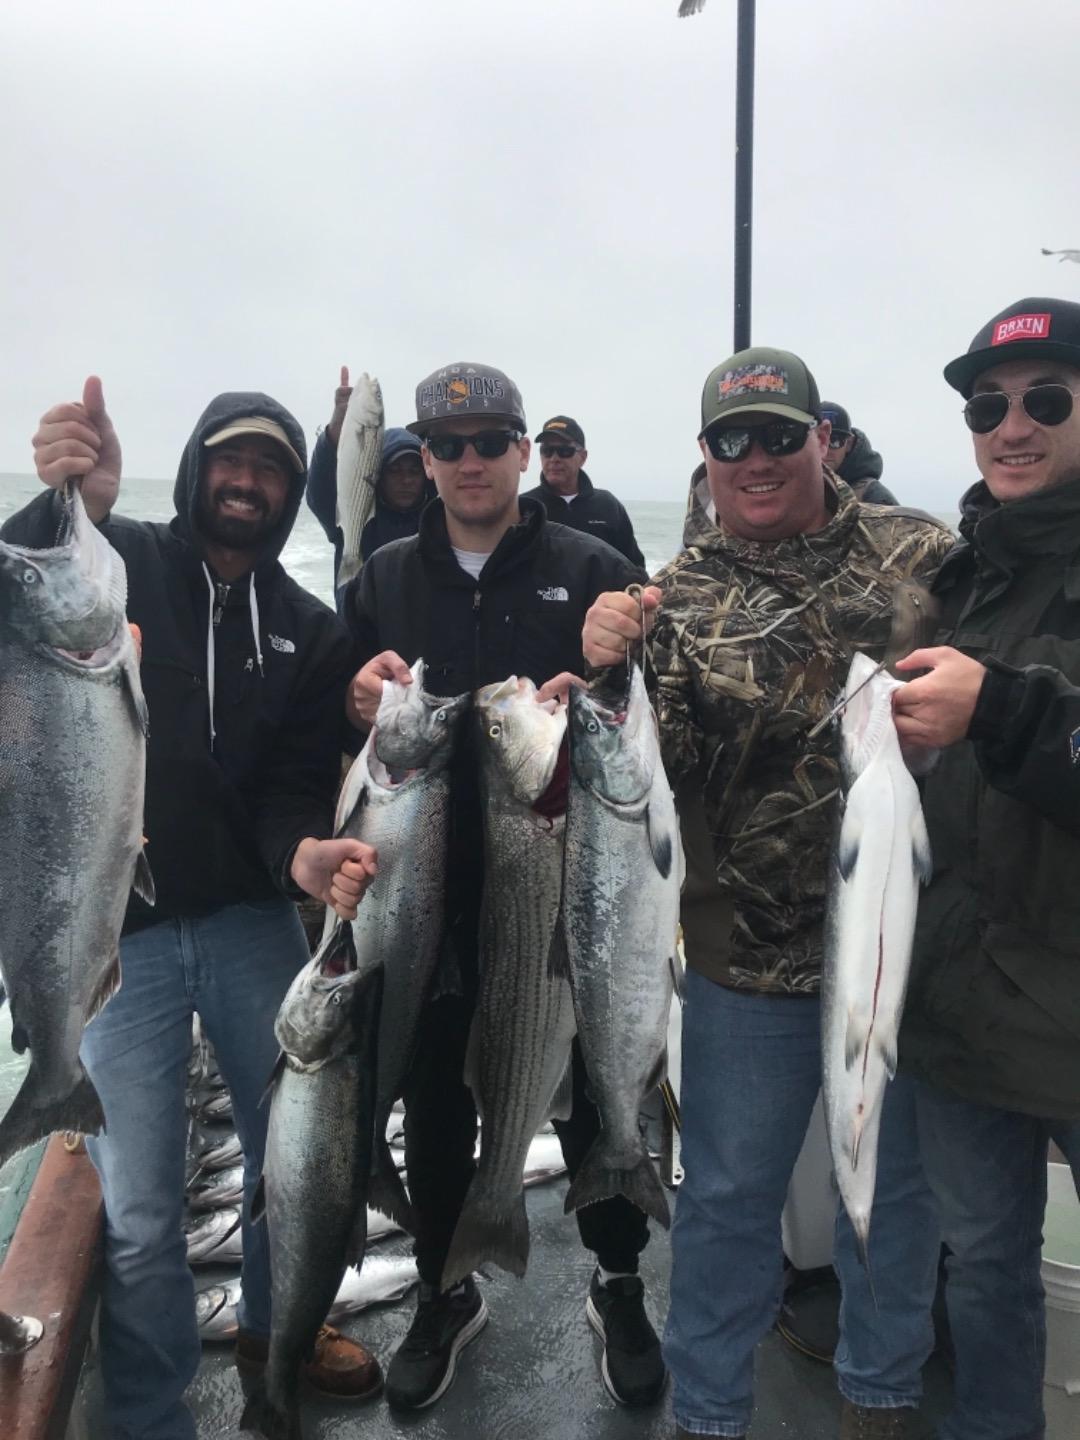 Another solid day of salmon fishing!